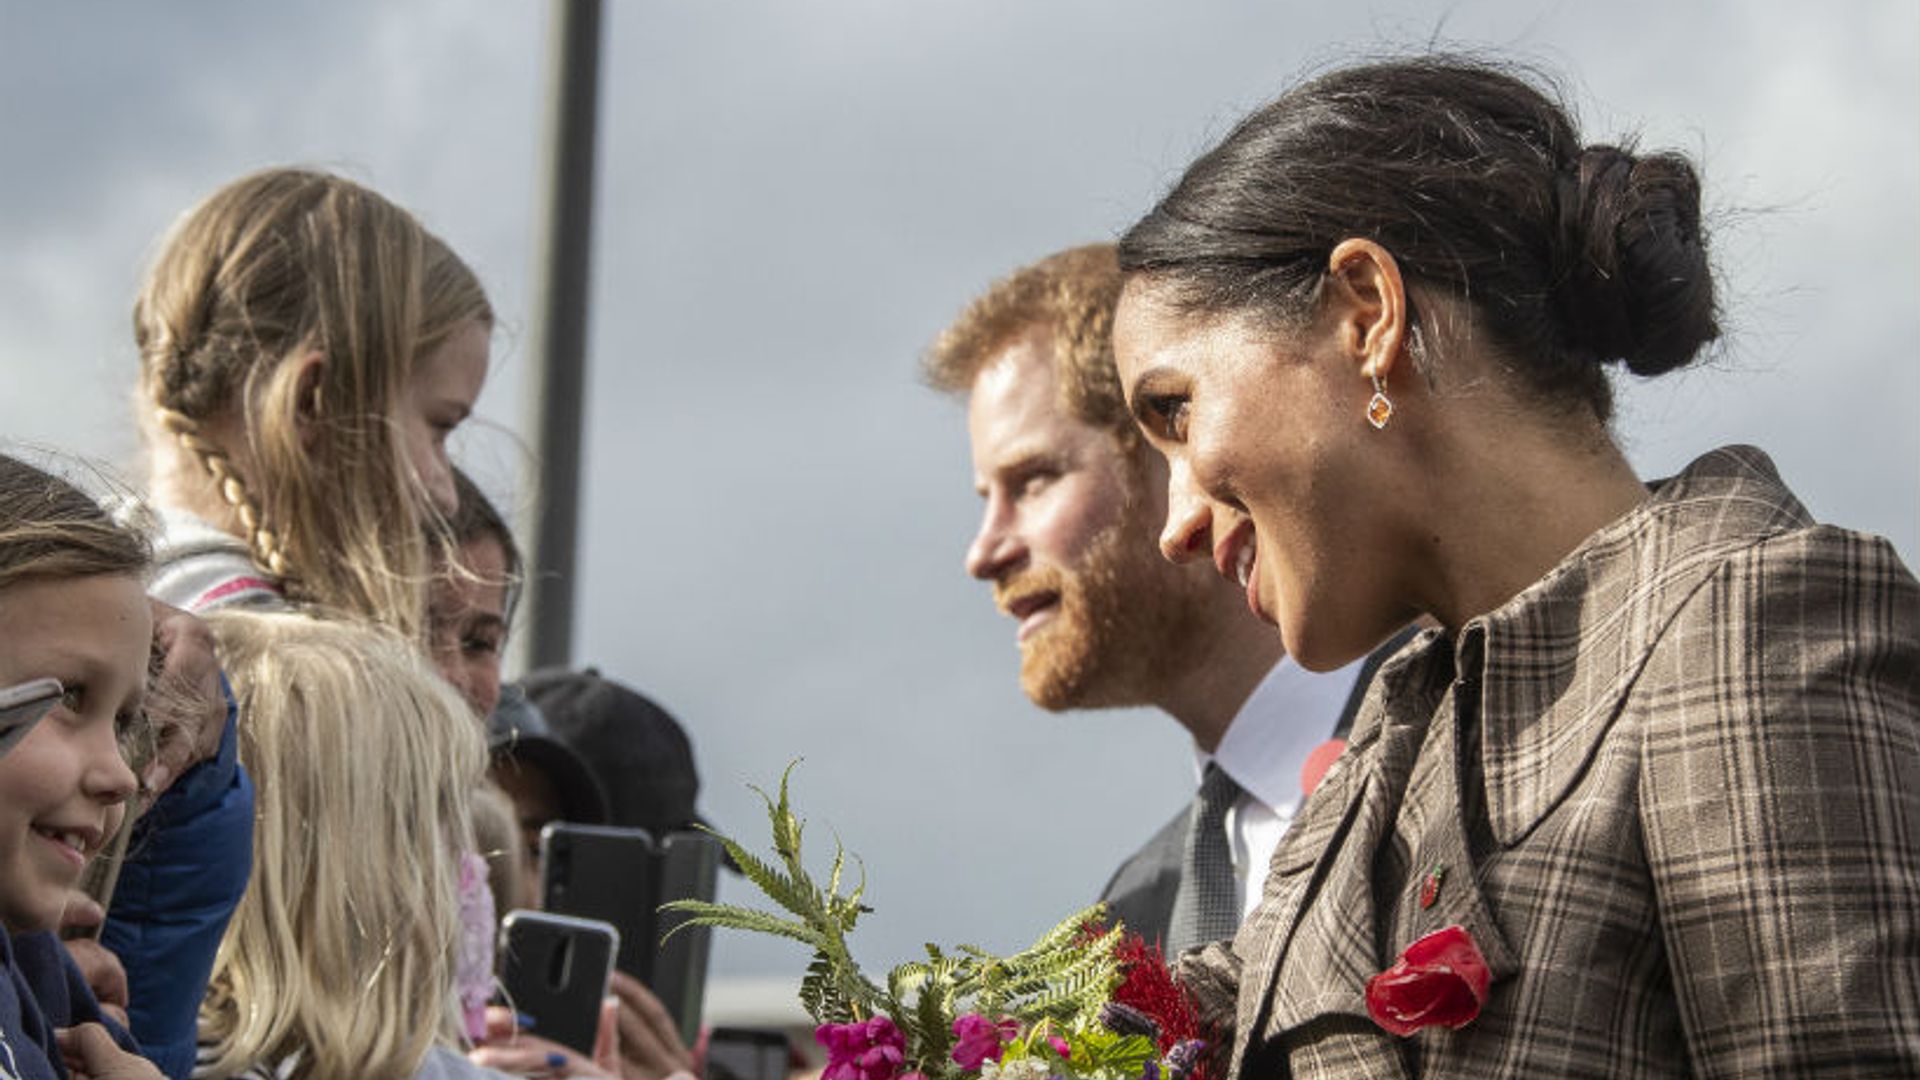 Prince Harry and Meghan Markle receive more baby gifts on first day in New Zealand – all the best photos from day